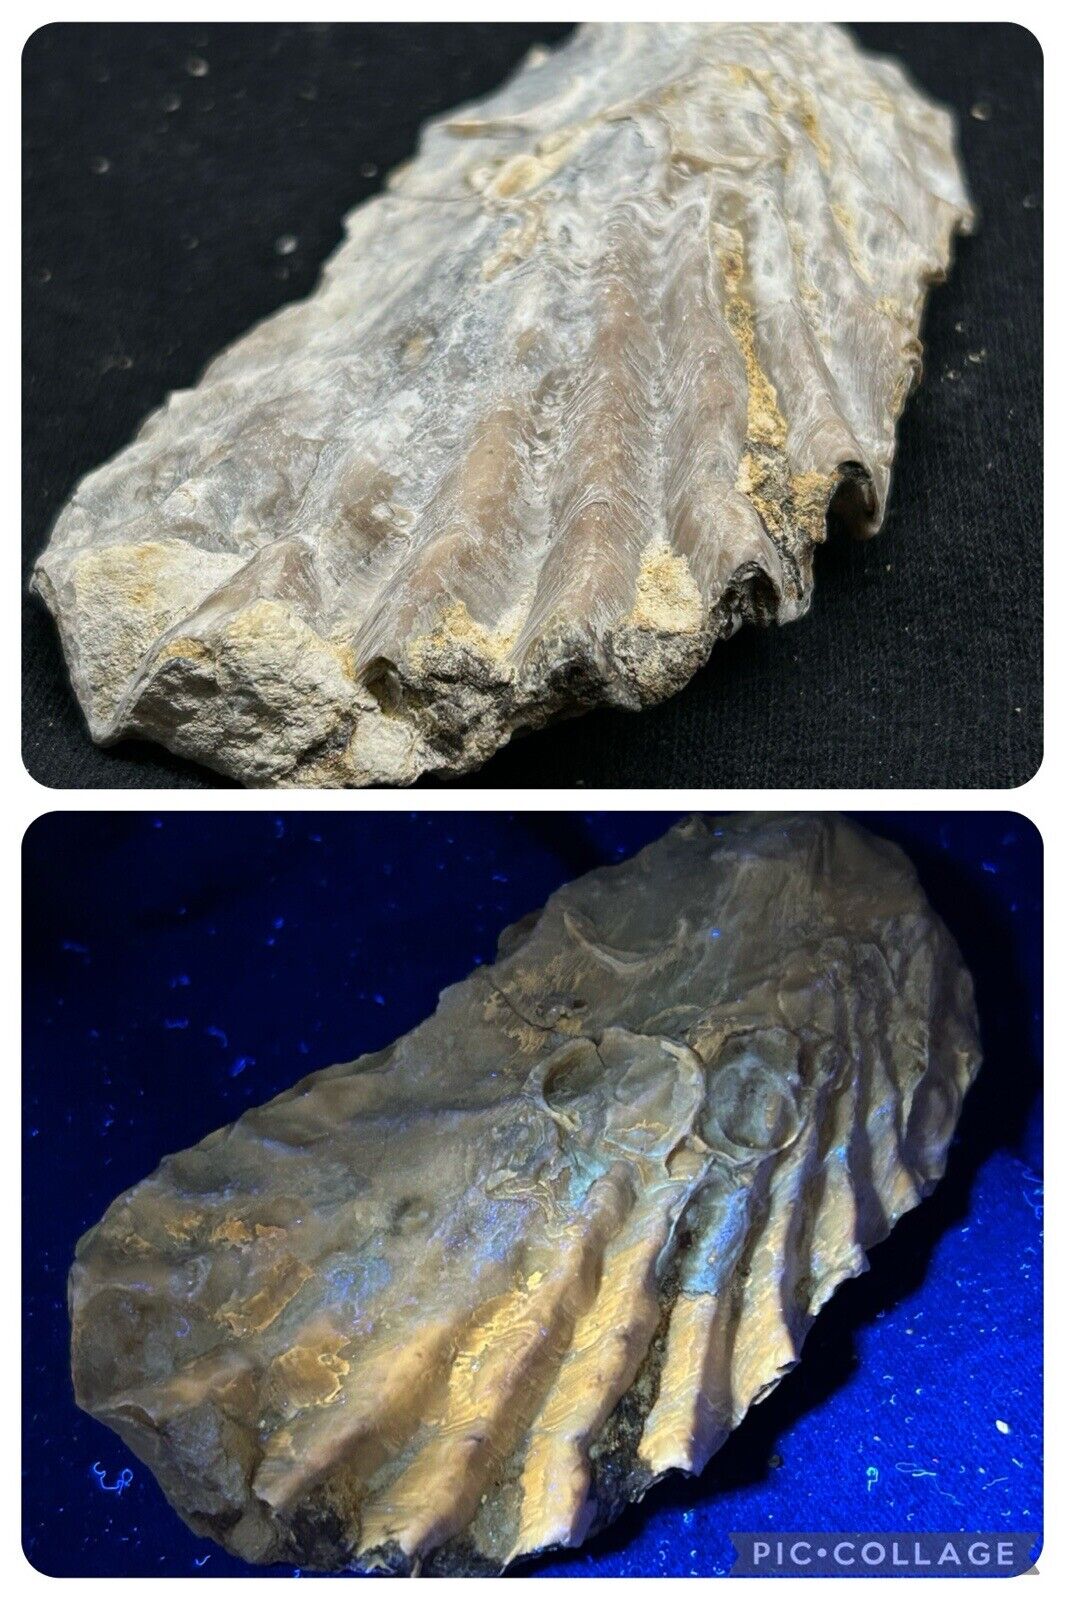 Texas Fossil Bivalve, Lopha Sp. Cretaceous Age Oyster Goodland Formation